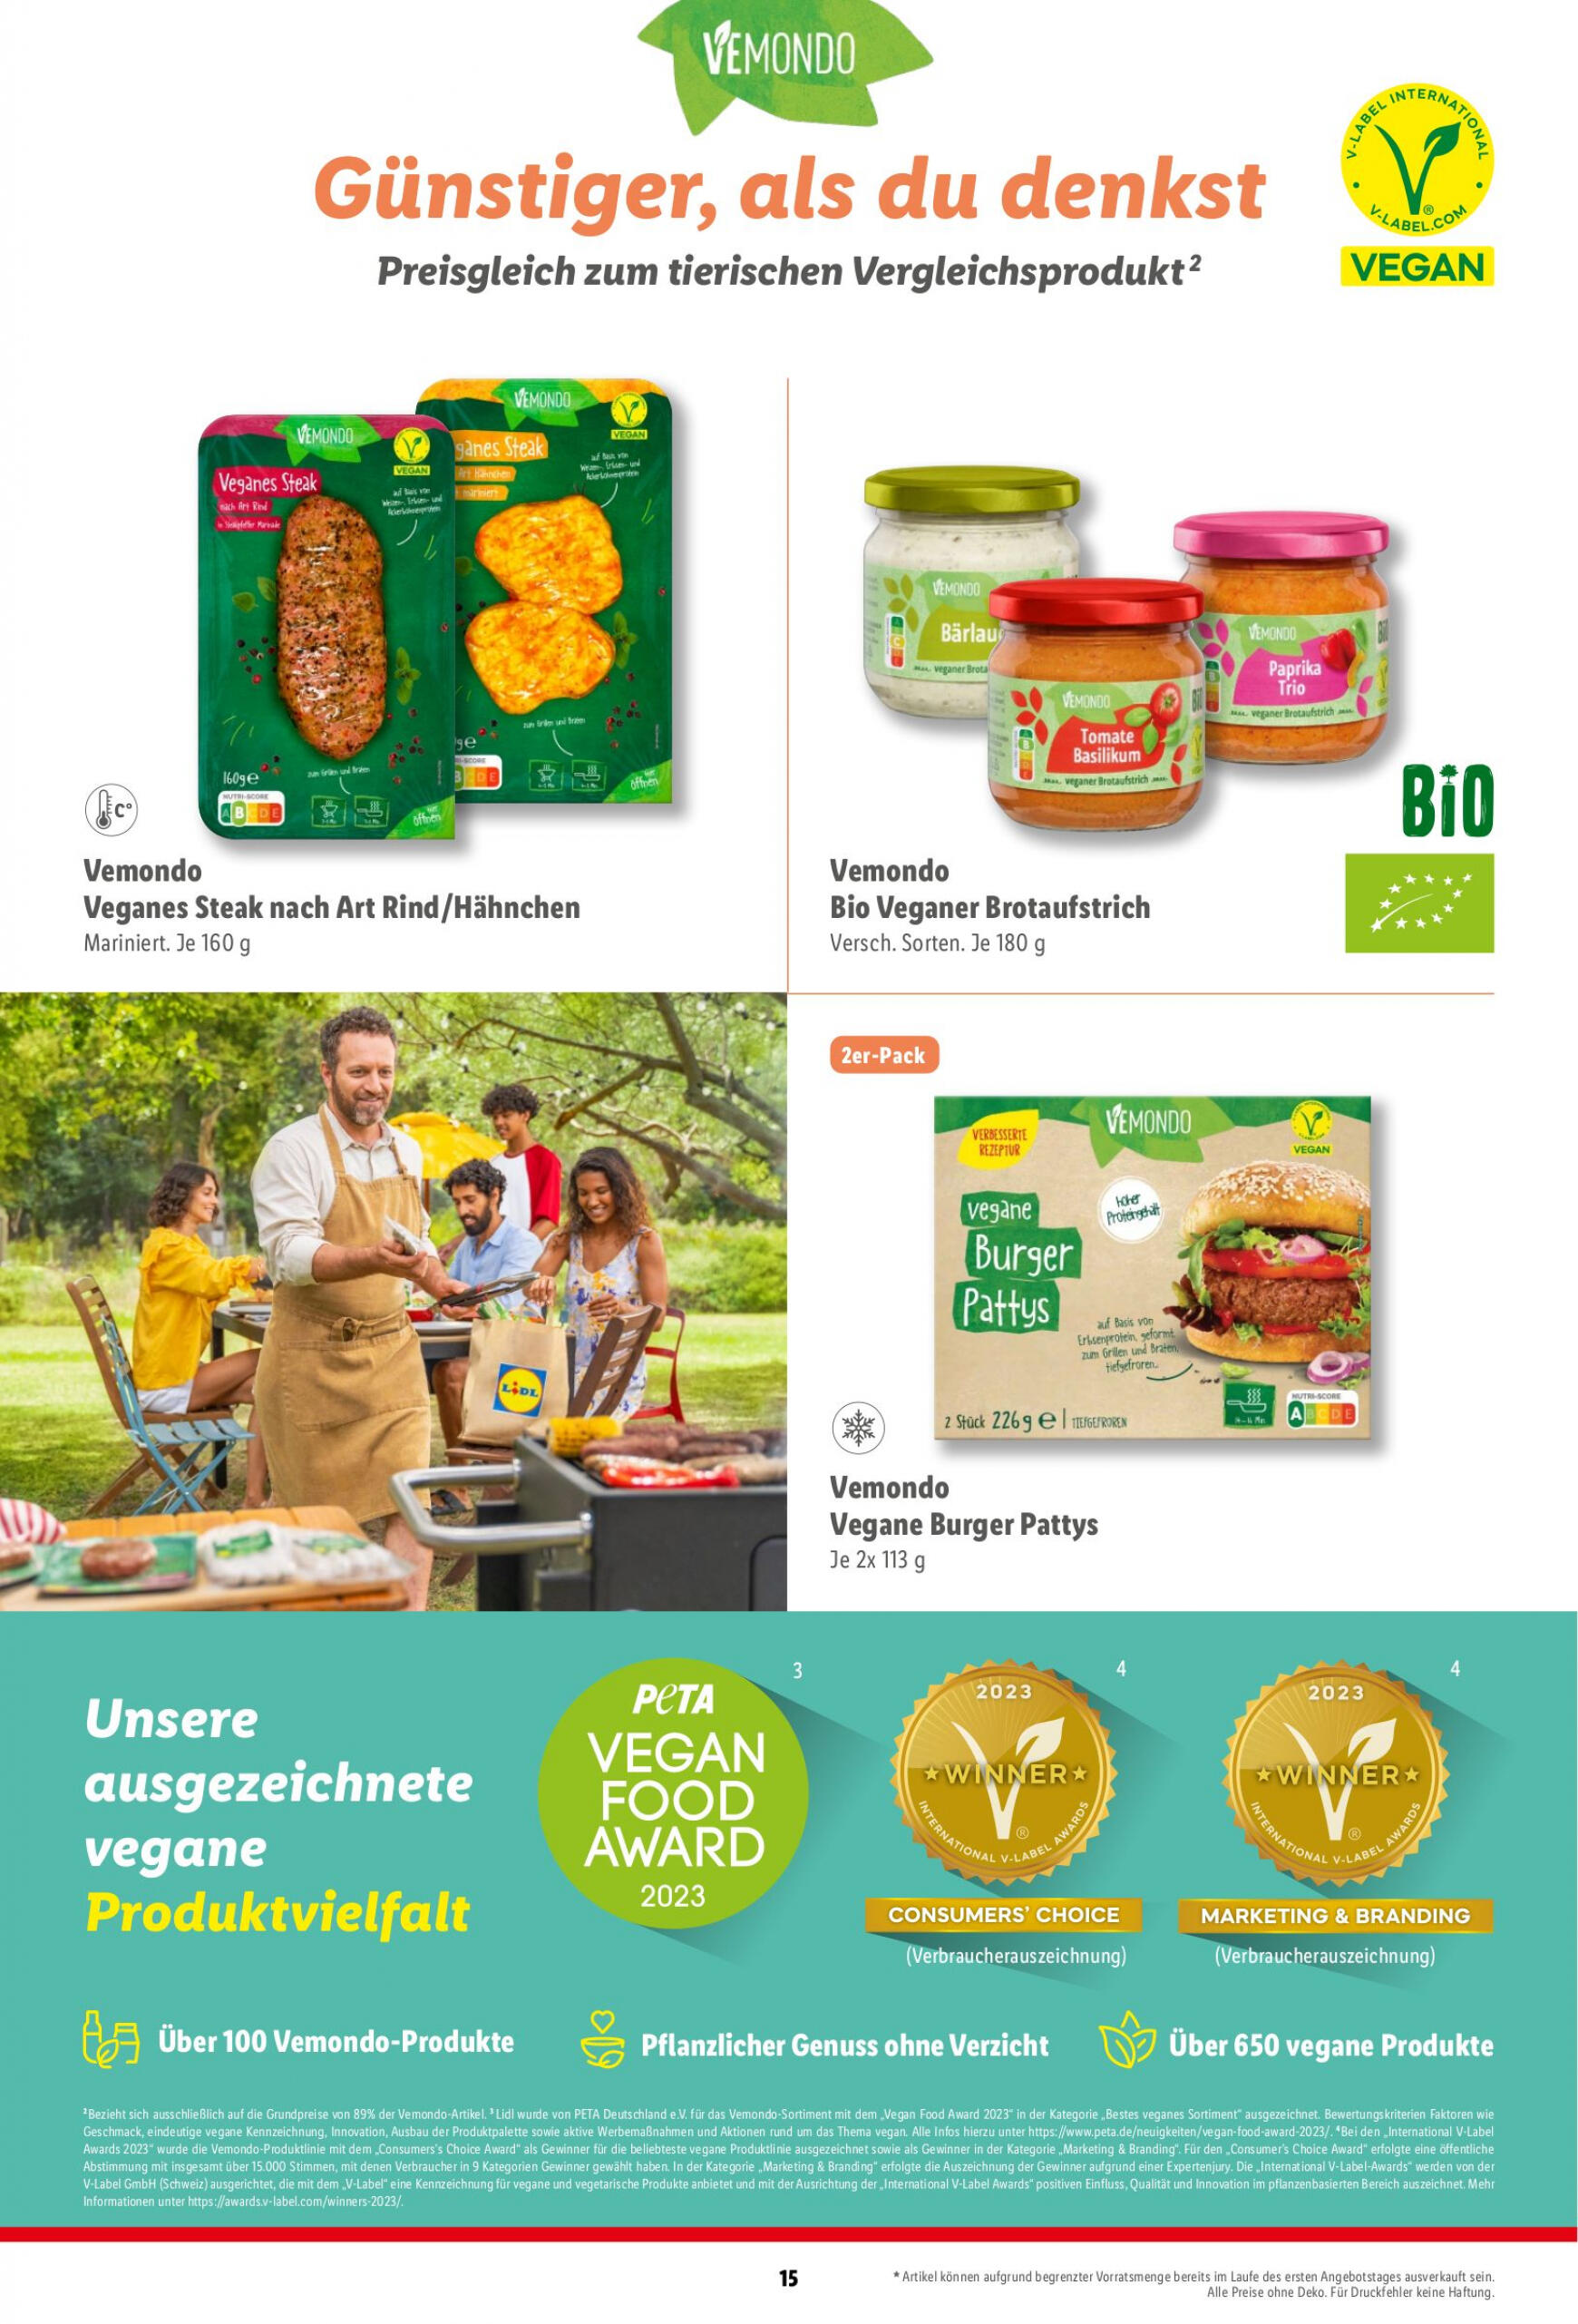 lidl - Flyer Lidl - Grillmagazin aktuell 22.04. - 30.06. - page: 15